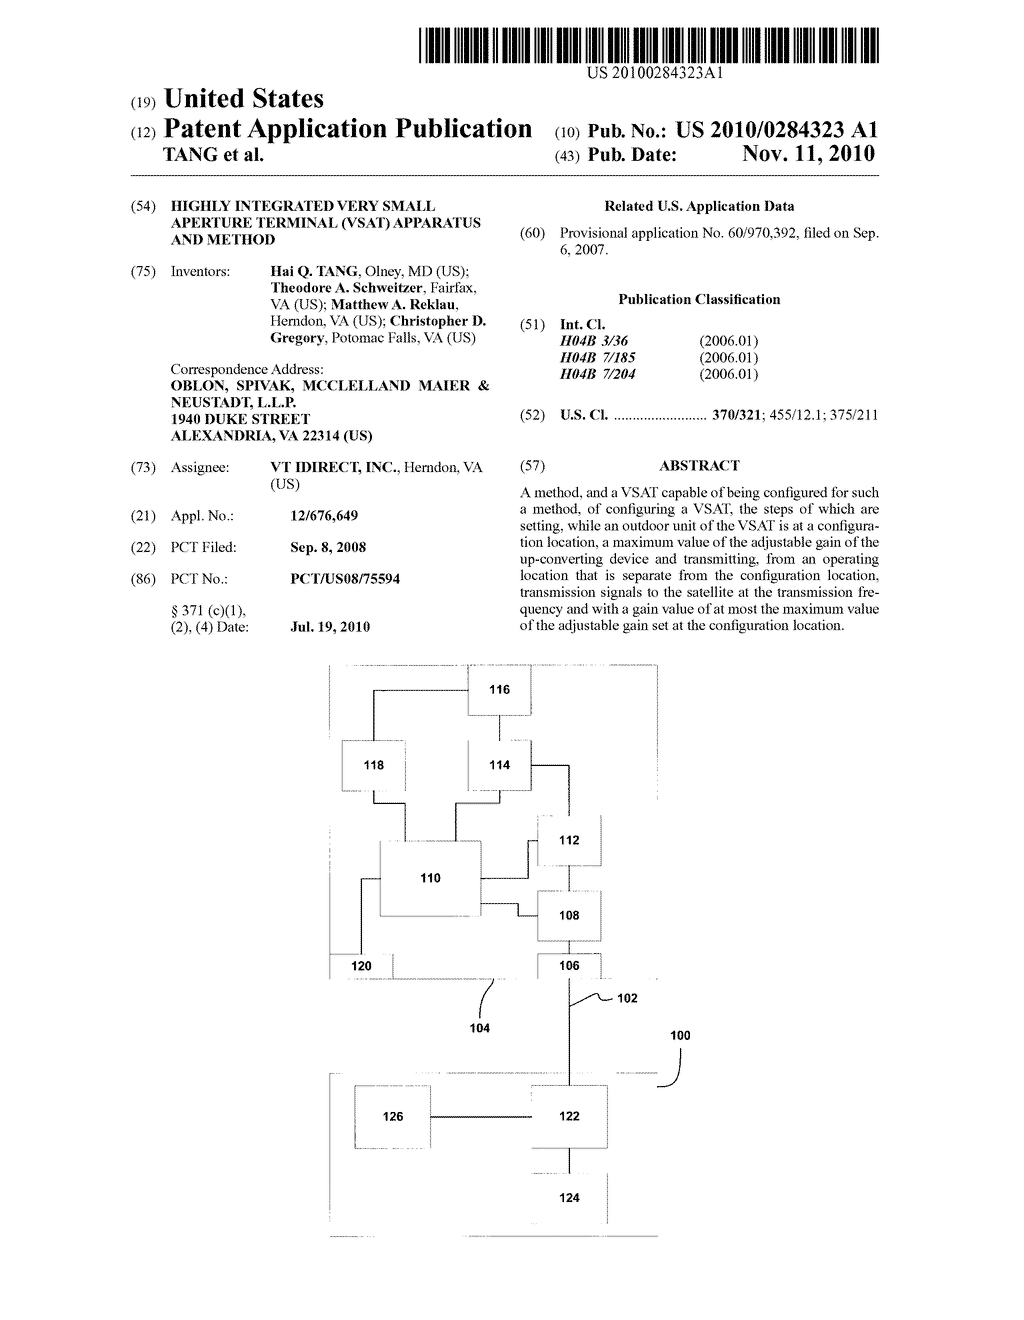 HIGHLY INTEGRATED VERY SMALL APERTURE TERMINAL (VSAT) APPARATUS AND METHOD - diagram, schematic, and image 01